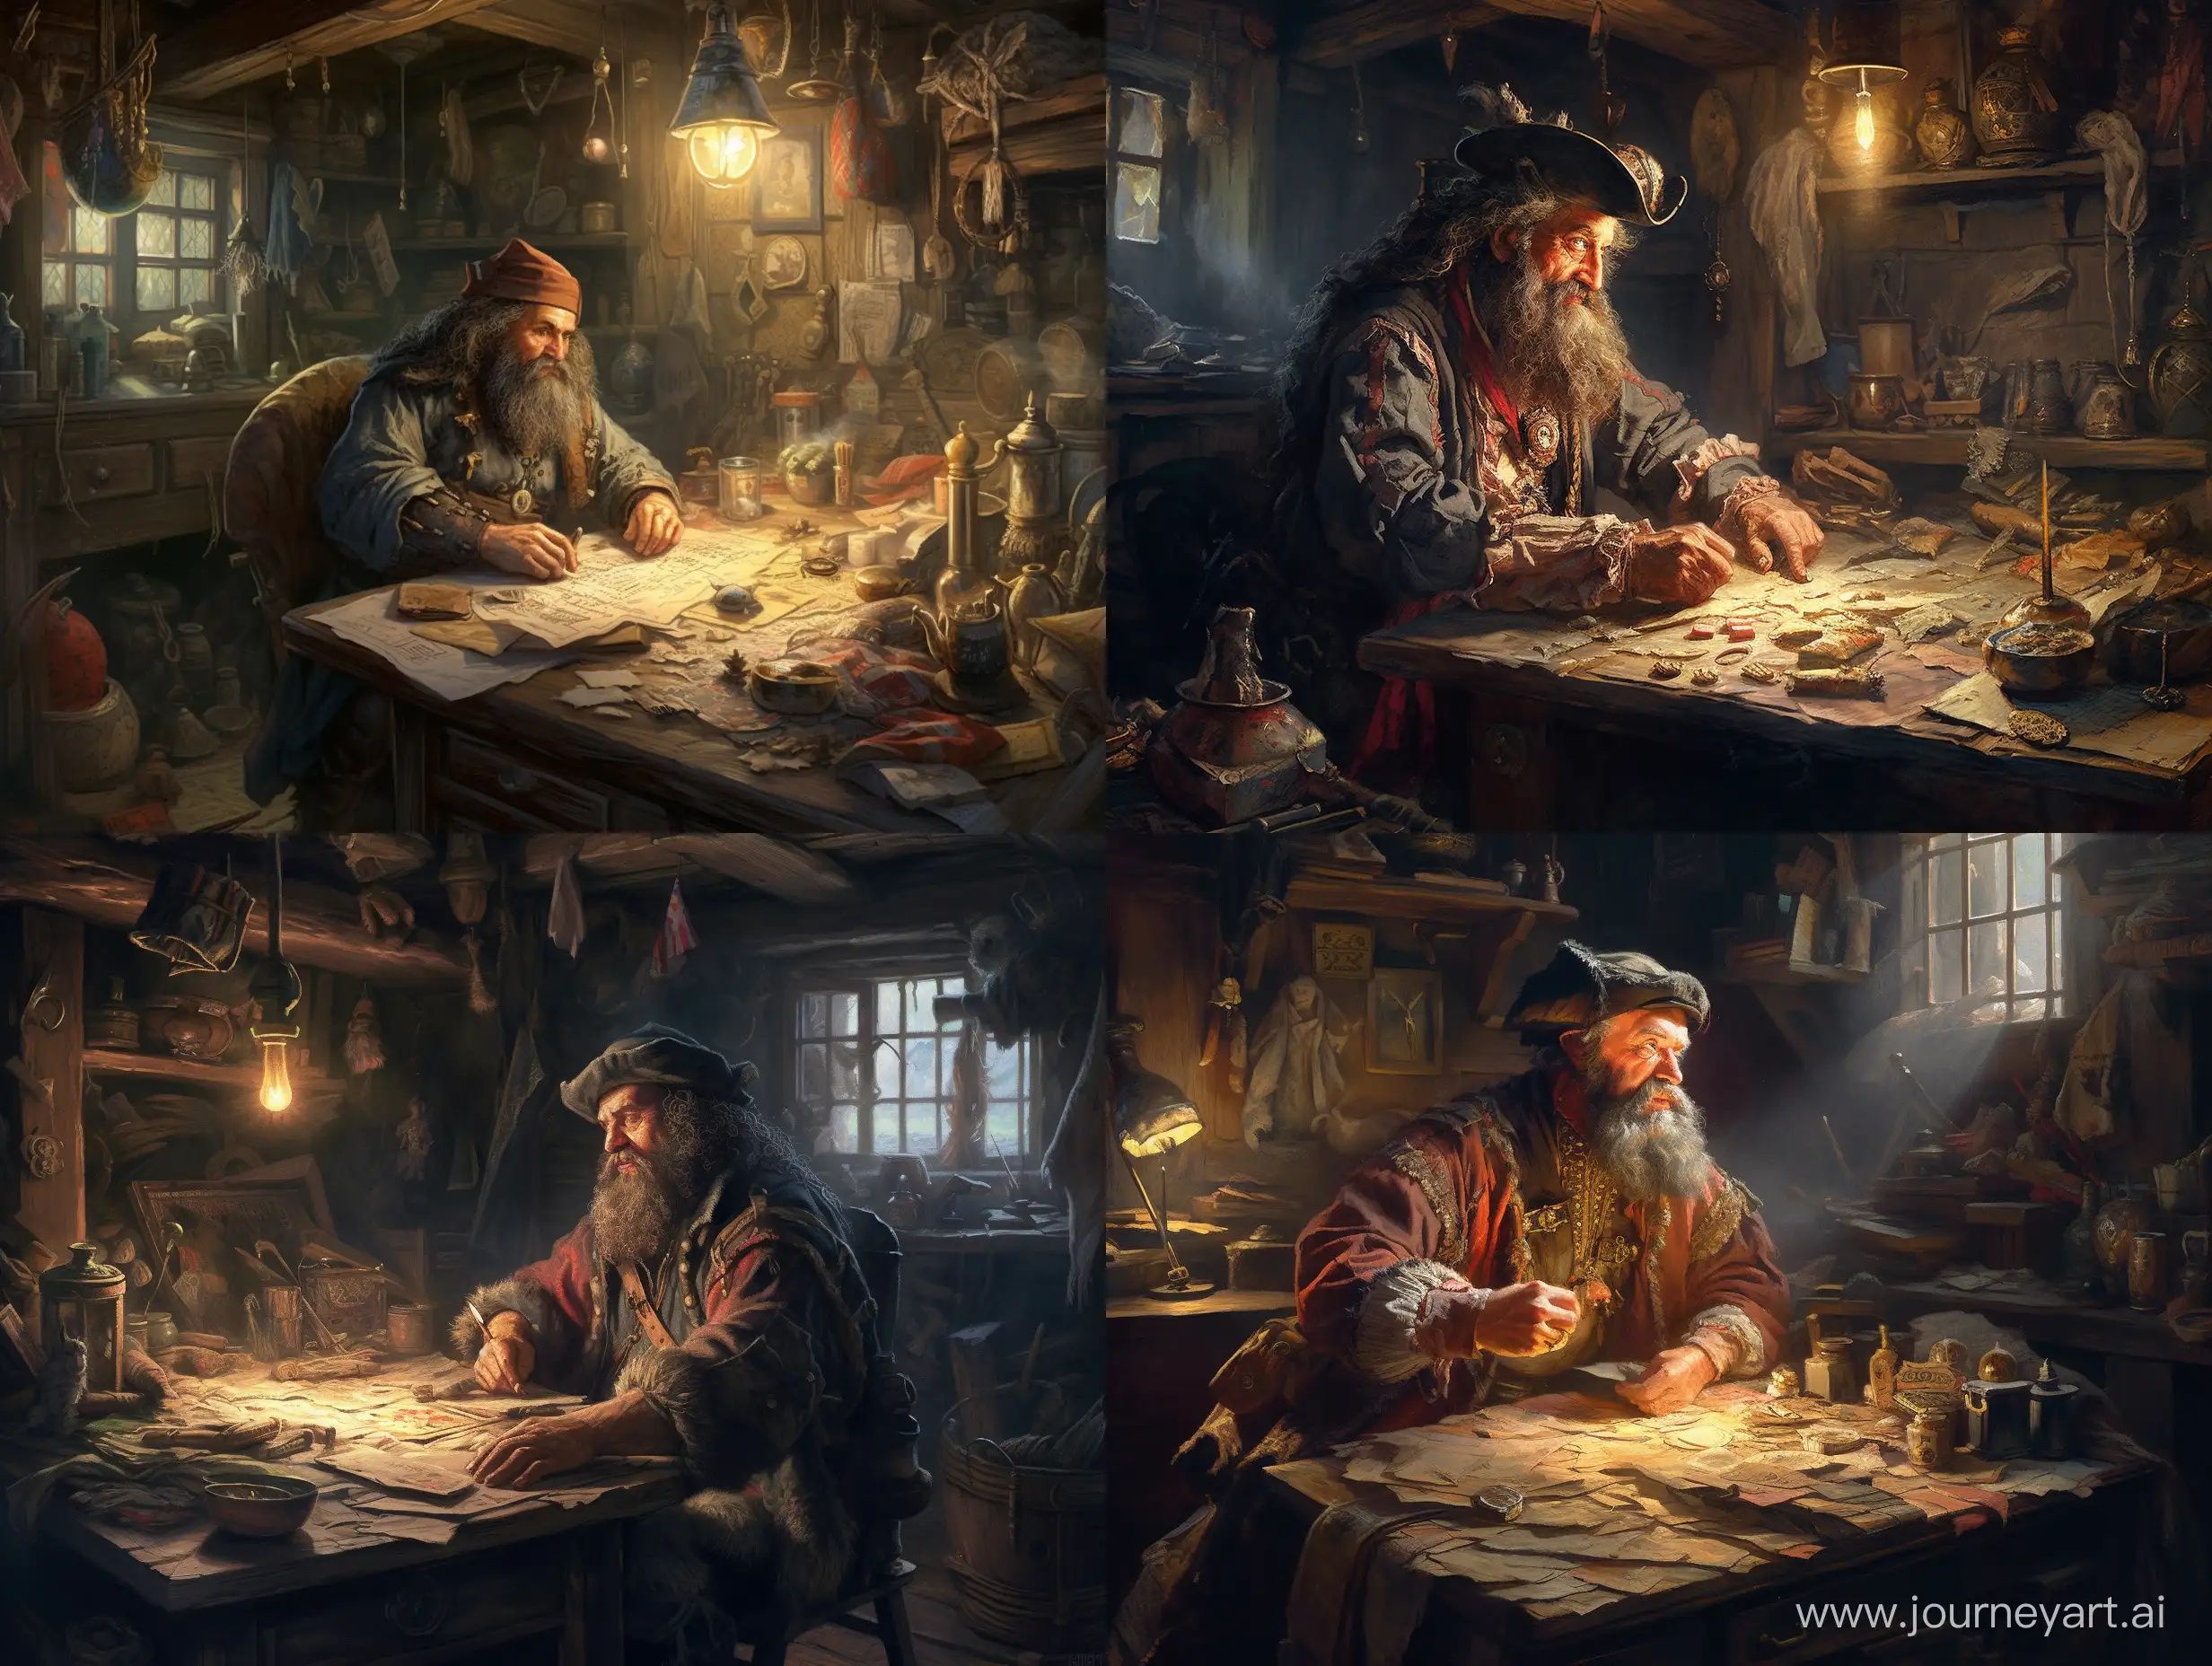 Blackbeard-Planning-Pirate-Raid-Surrounded-by-Treasures